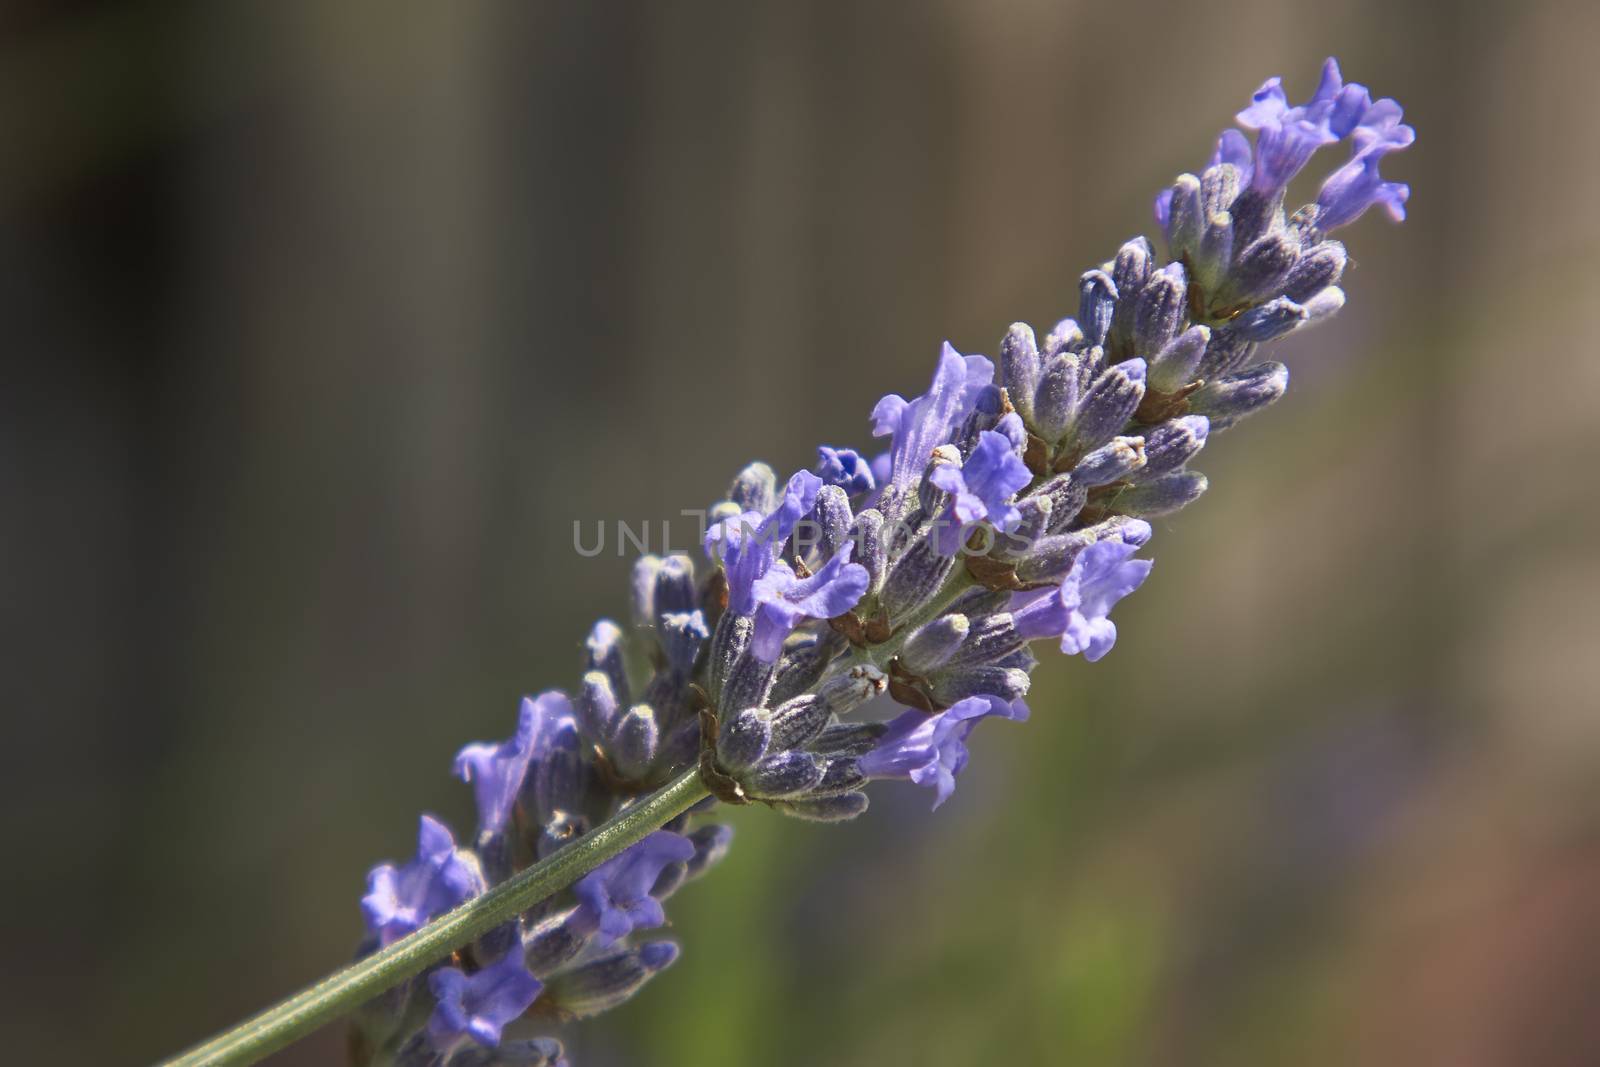 Lavender flower in a fantastic detail with macro shot, where you can see all the smallest details of this fragrant flower.